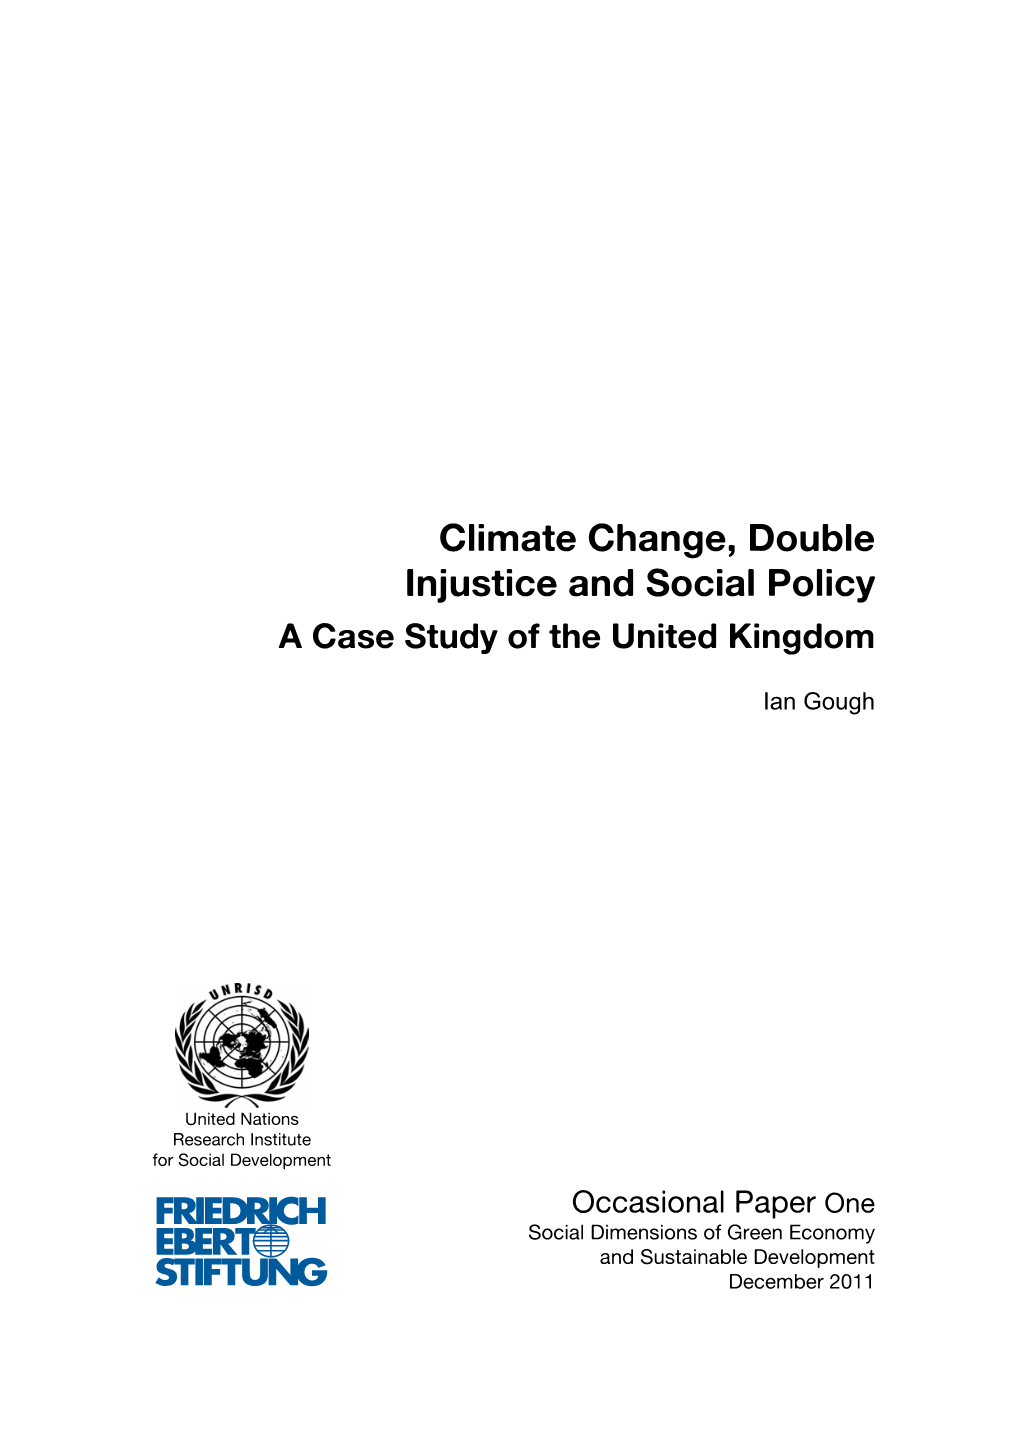 Climate Change, Double Injustice and Social Policy a Case Study of the United Kingdom